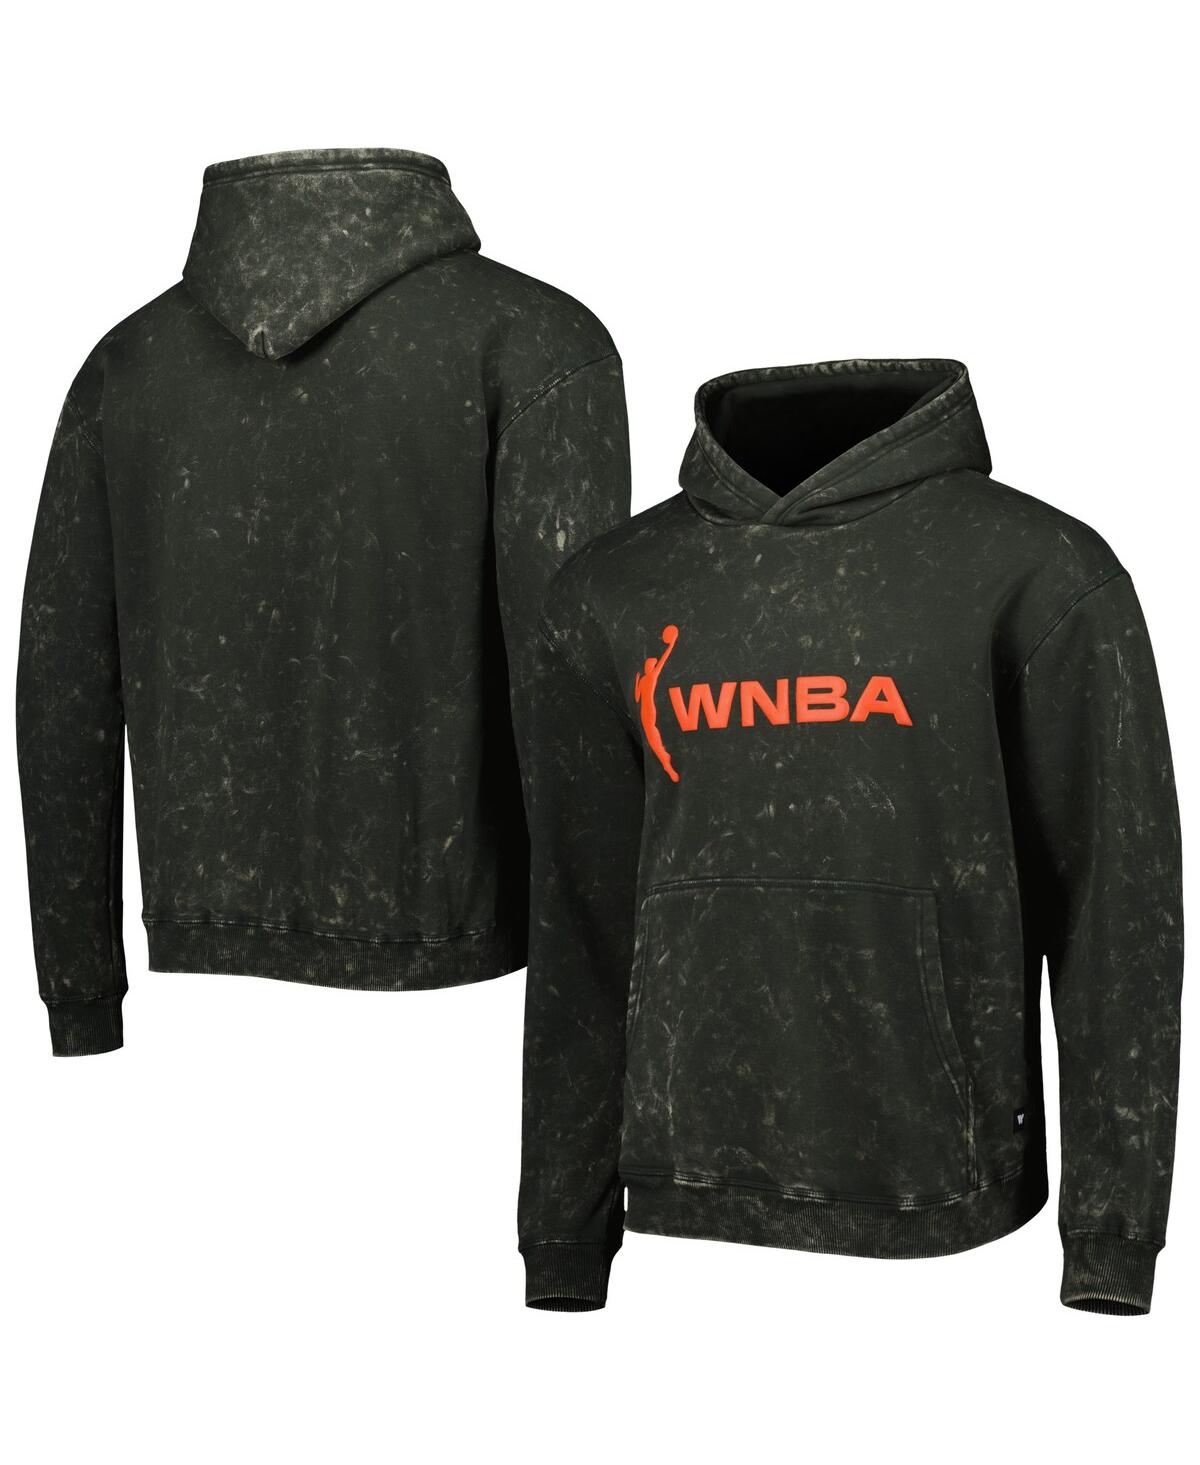 THE WILD COLLECTIVE MENS' AND WOMEN'S THE WILD COLLECTIVE BLACK WNBA ACID TONAL LOGOWOMAN PULLOVER HOODIE